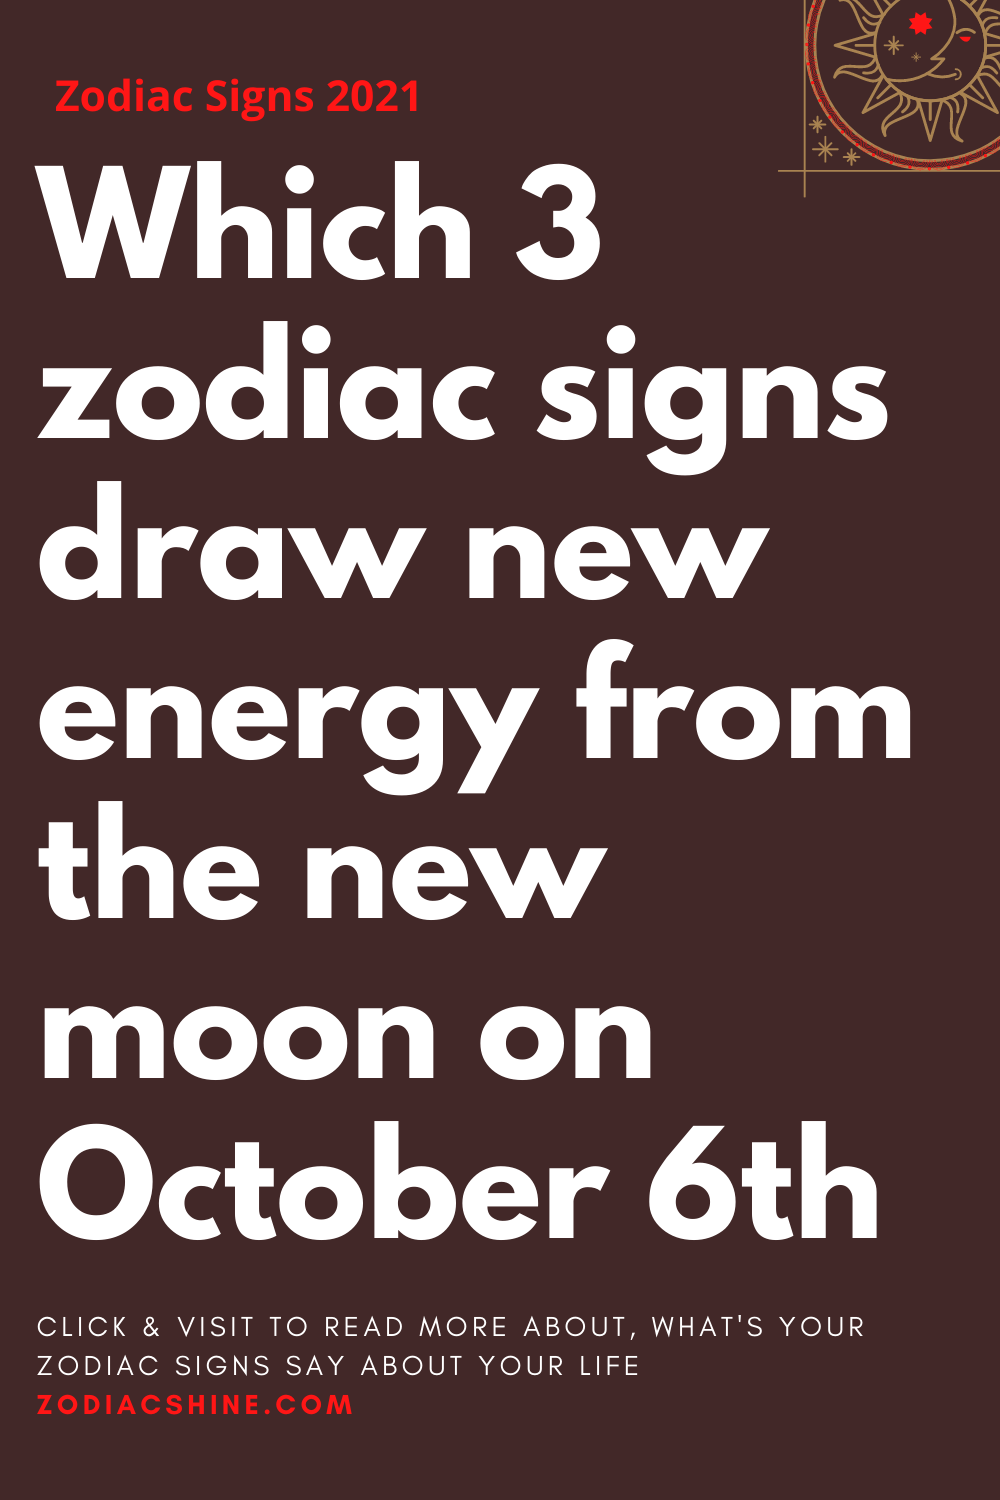 Which 3 zodiac signs draw new energy from the new moon on October 6th